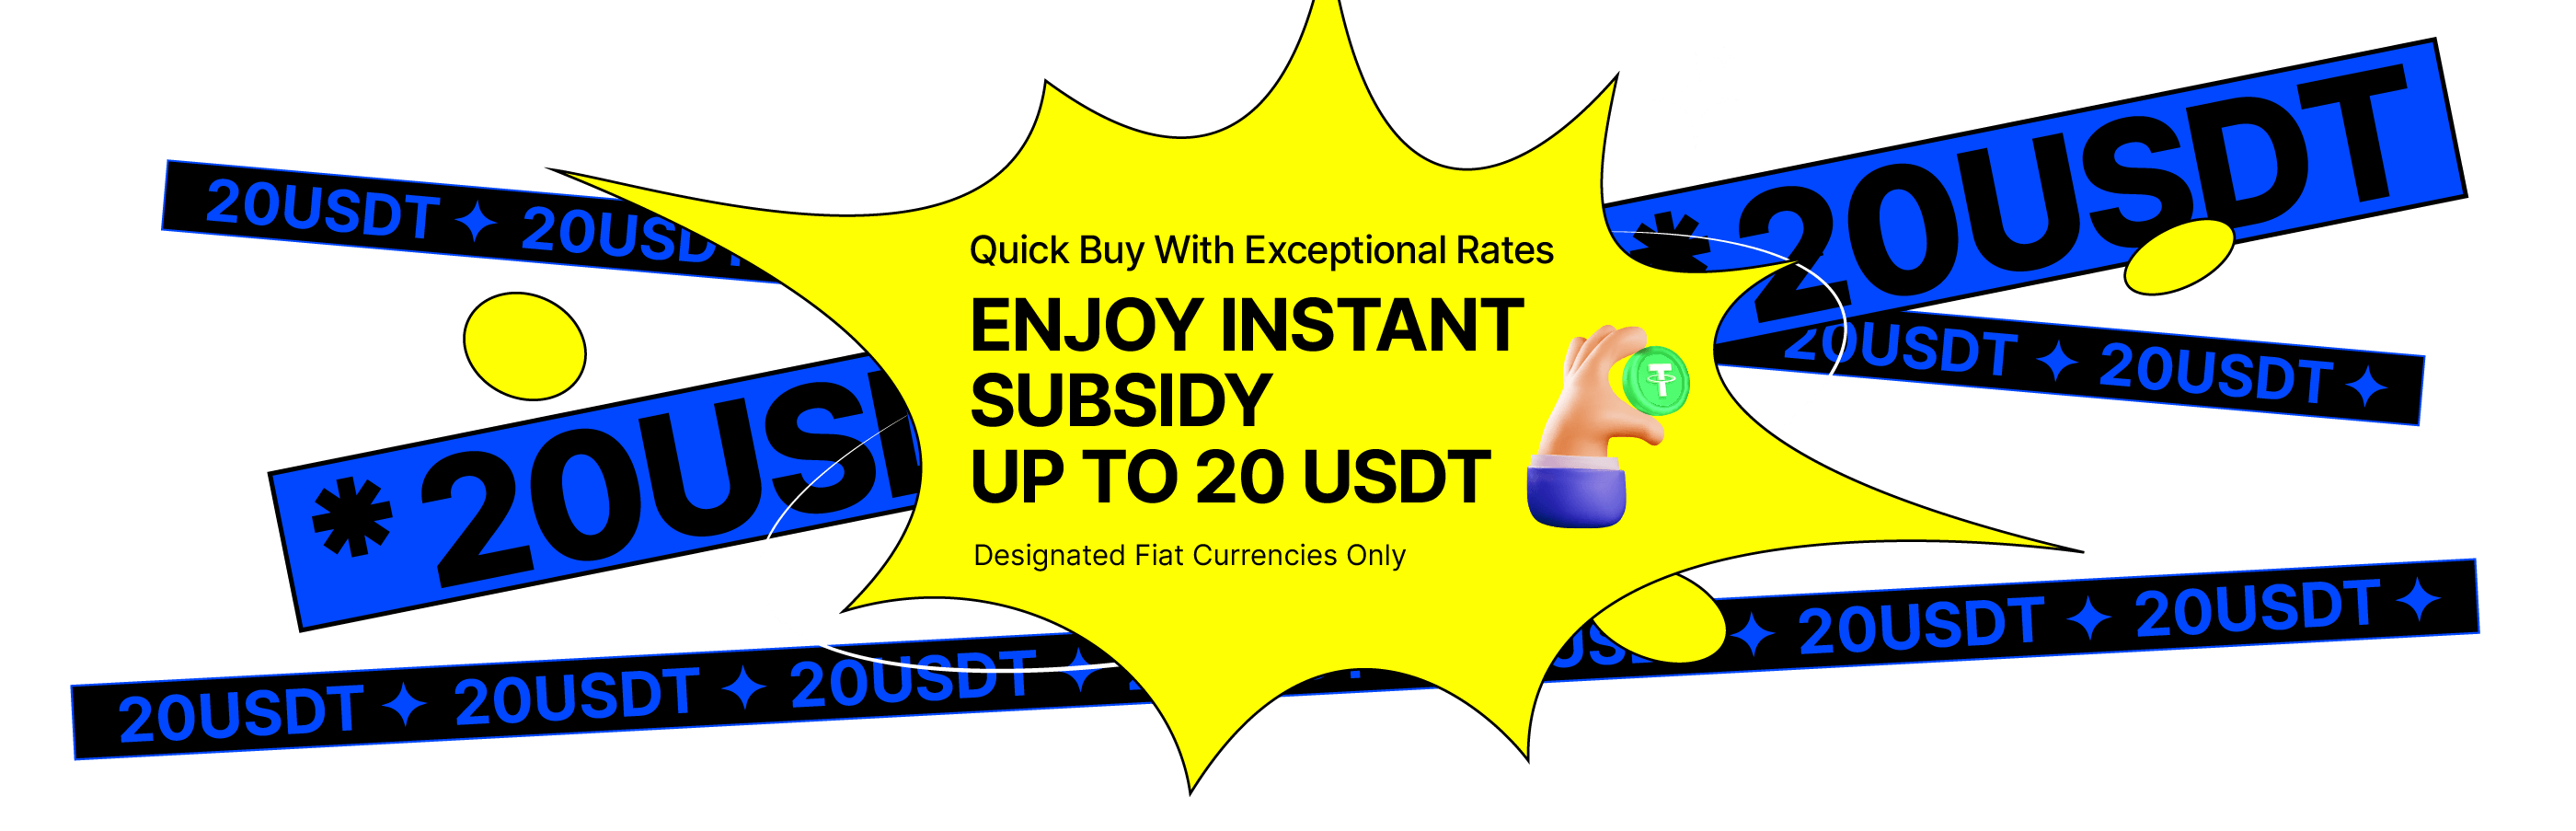 Limited-Time Buy Crypto Offer, Claim Up to 20 USDT Subsidy Each